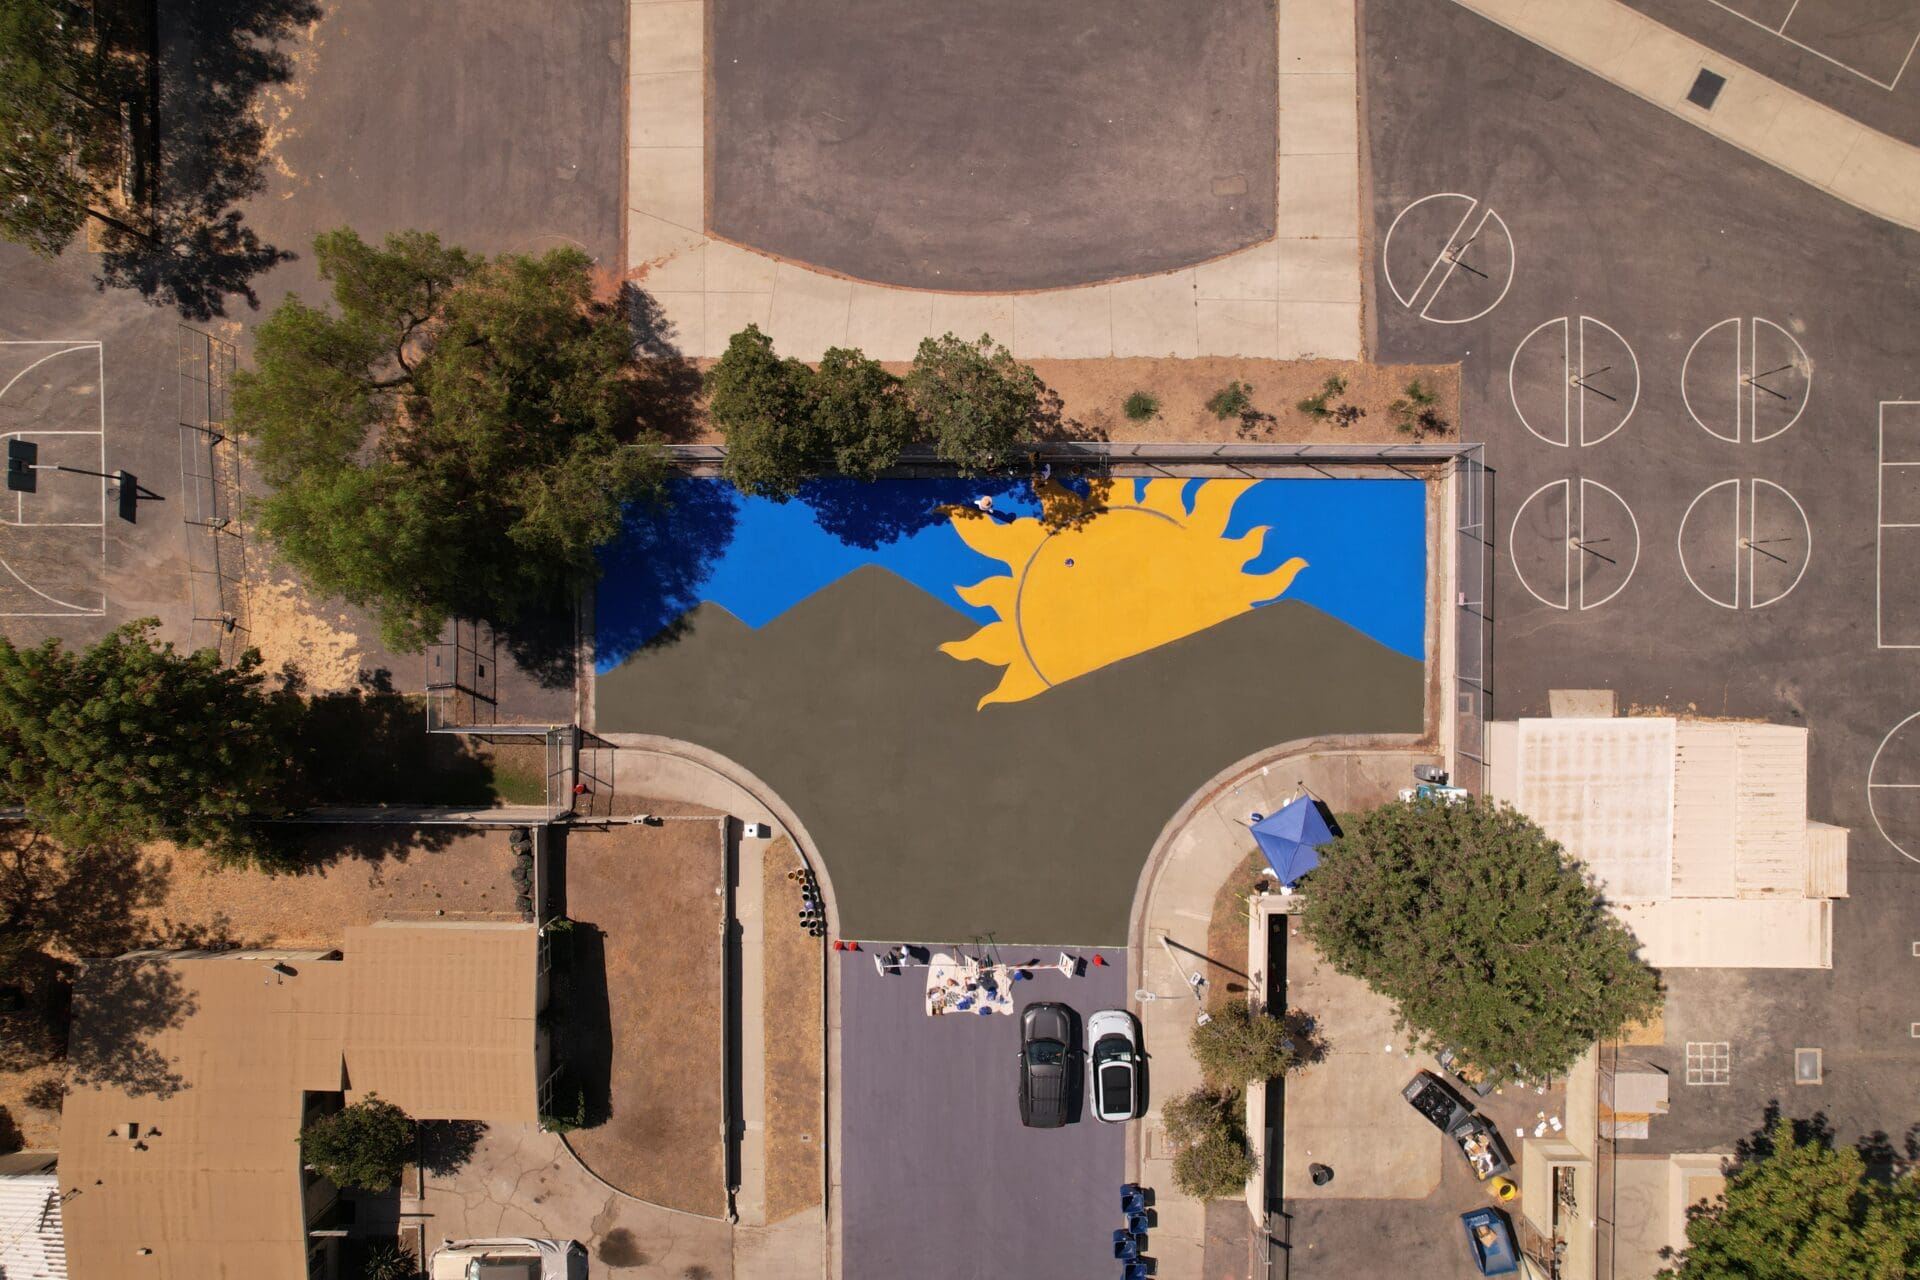 An aerial view of a work-in-progress neighbourhood mural by artist Desiree Sanchez painted on a community park in Pacoima, Los Angeles, featuring a yellow sun and a blue sky